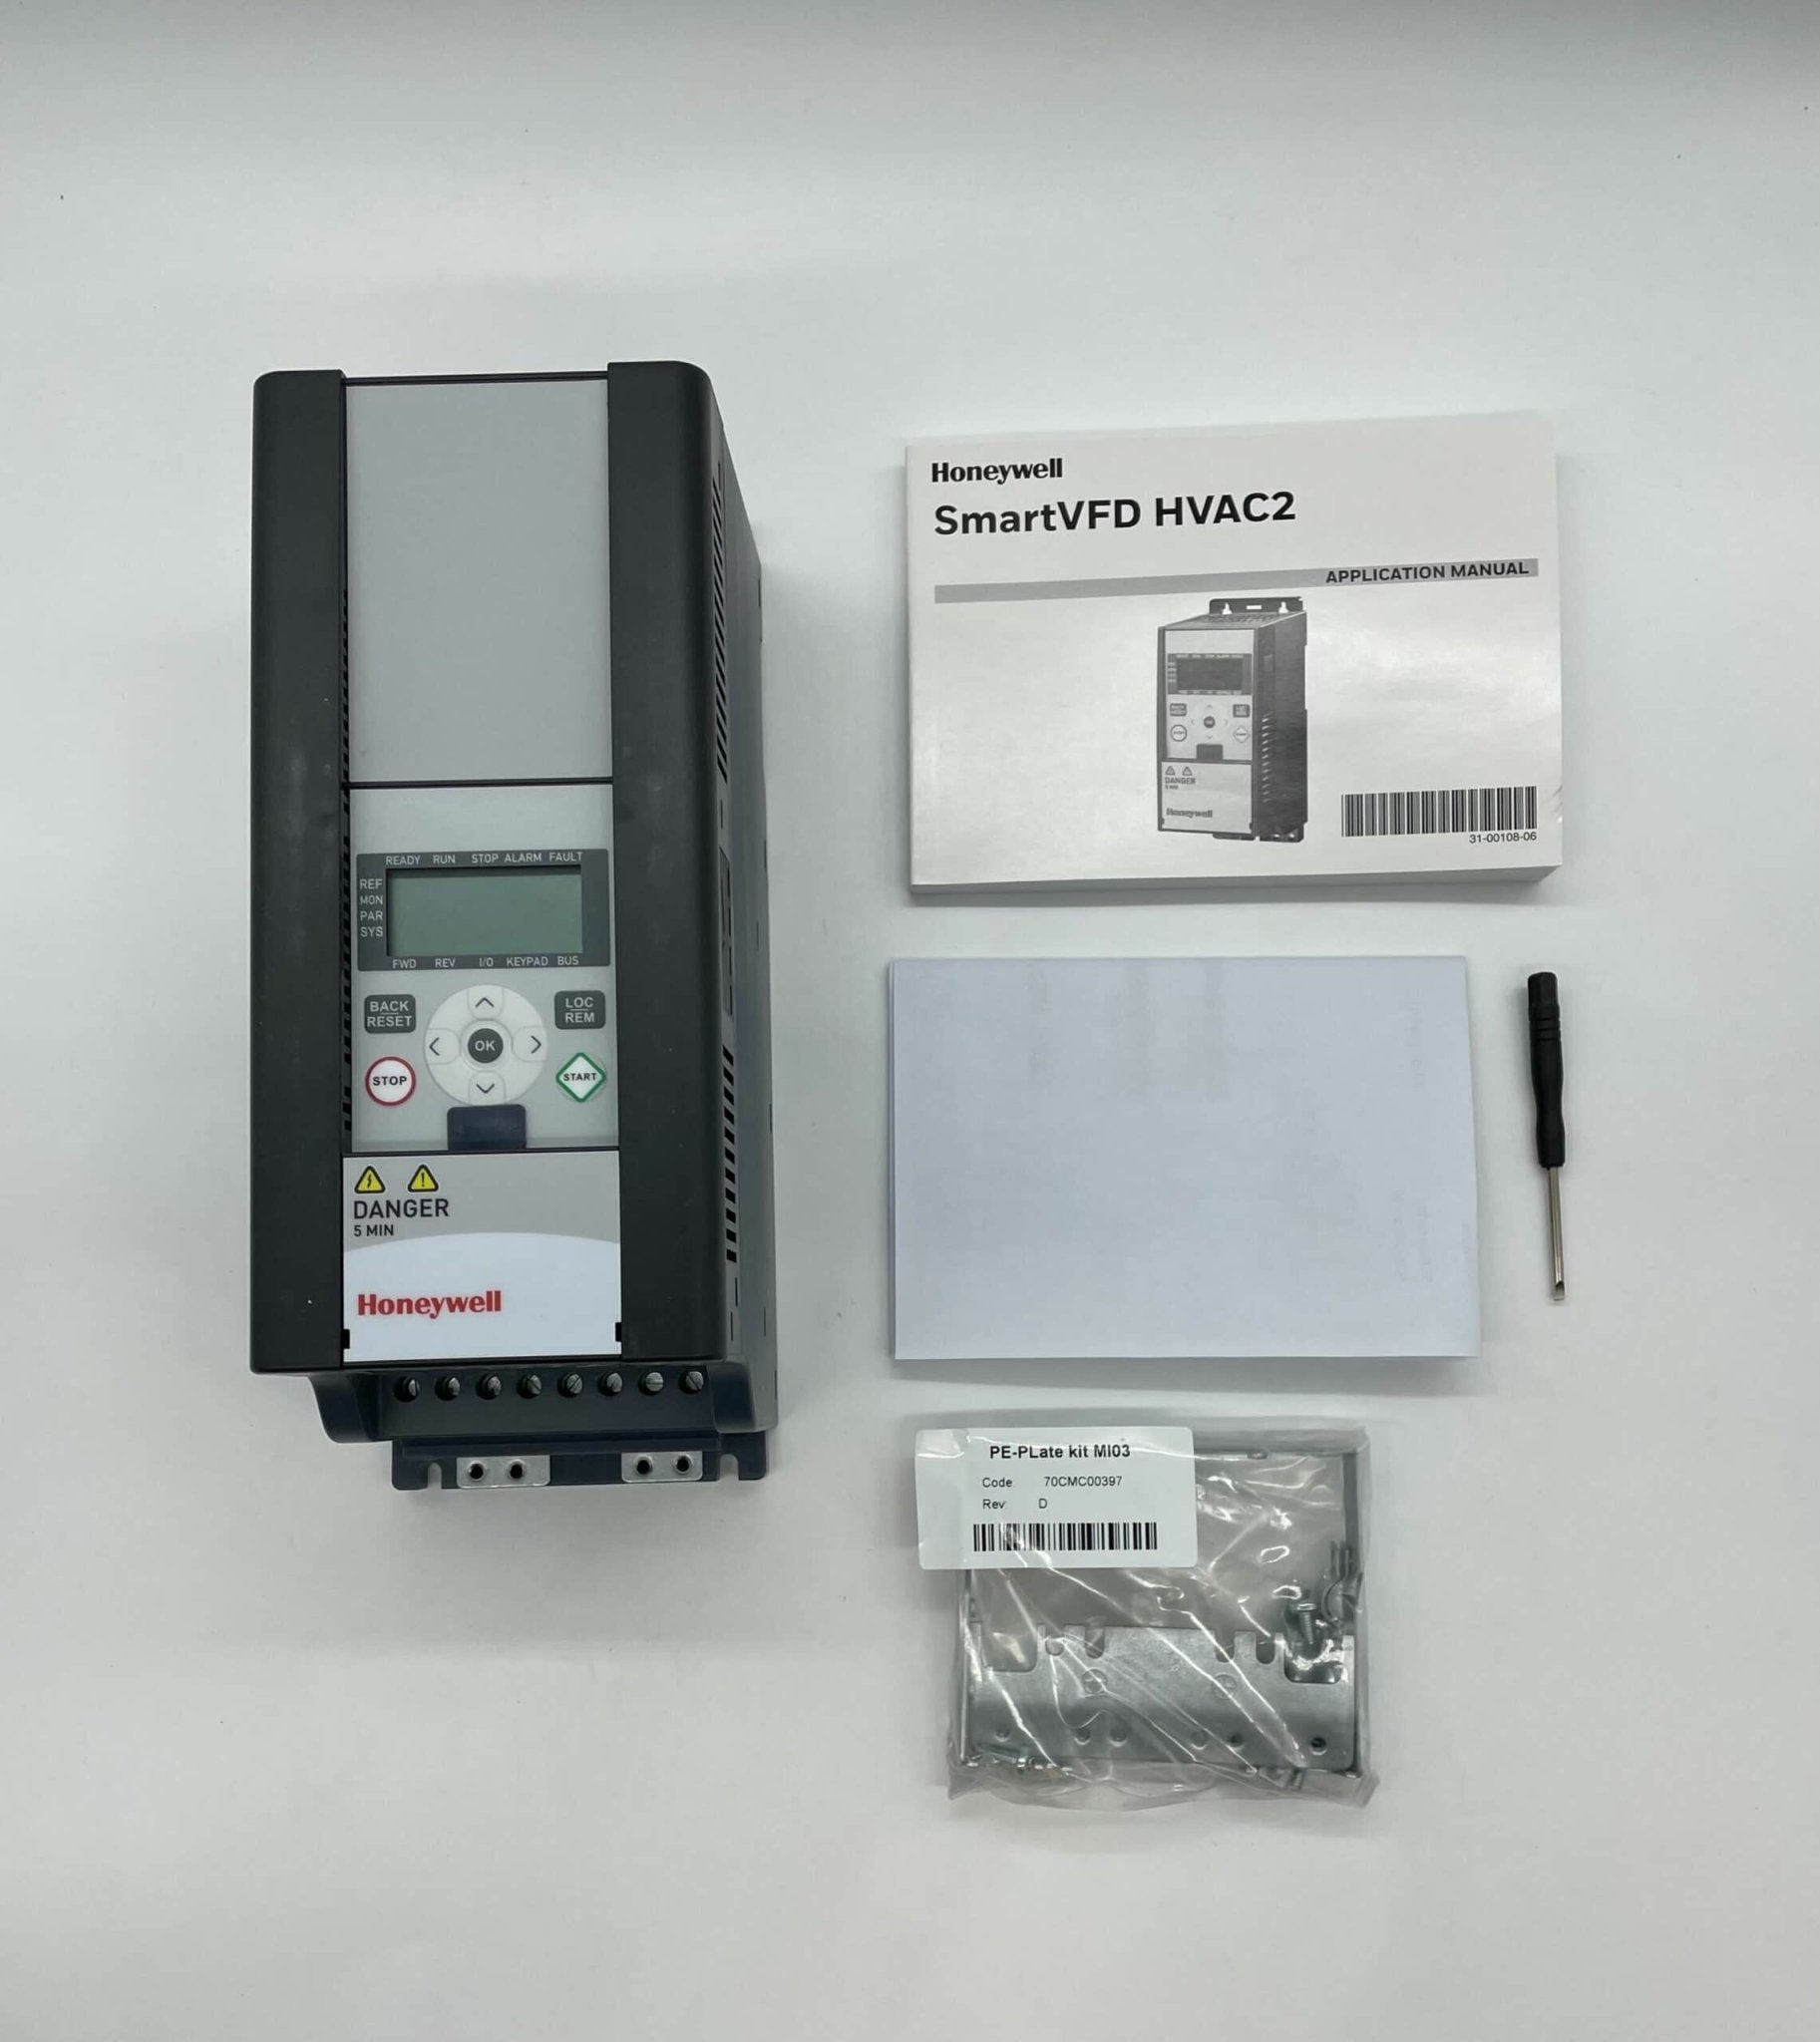 Honeywell HVFD2D3B0030 Variable Frequency Drive - The Fire Alarm Supplier